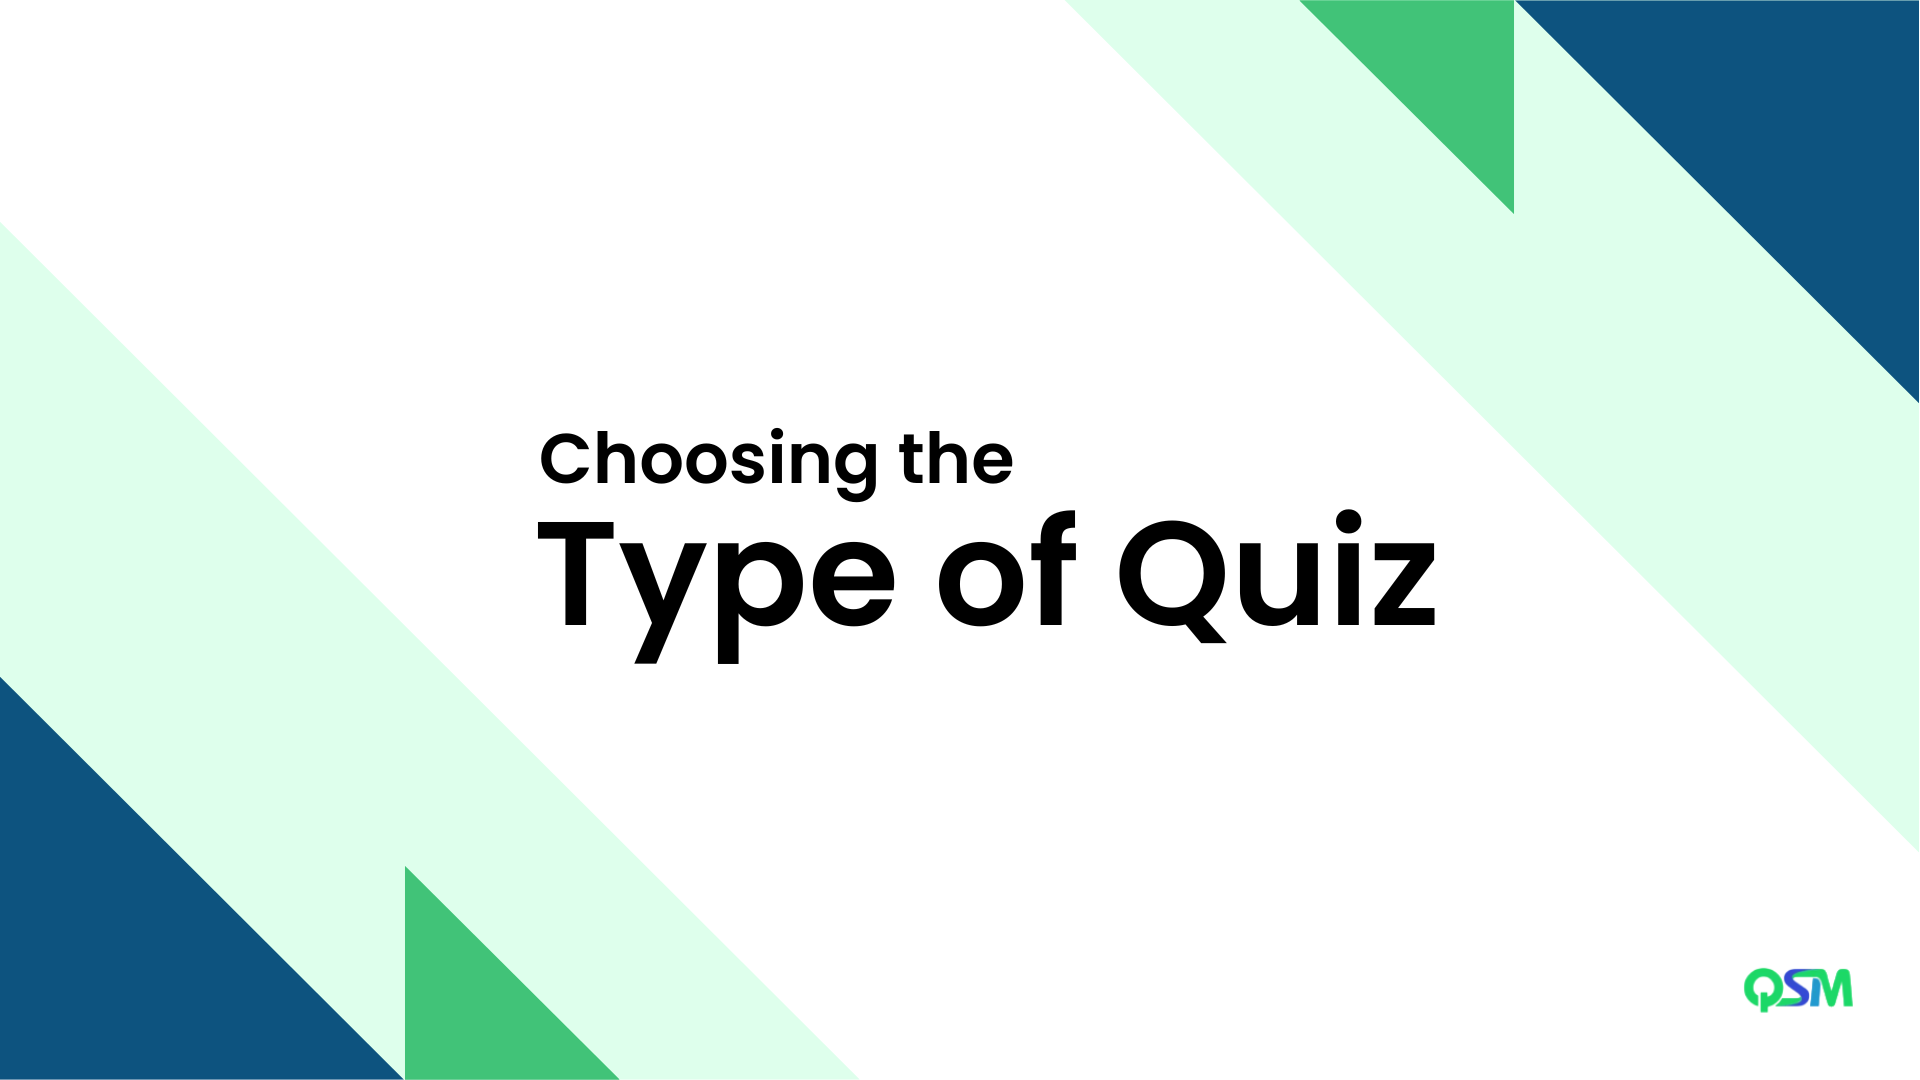 How to use Social Media Quizzes Professionally?